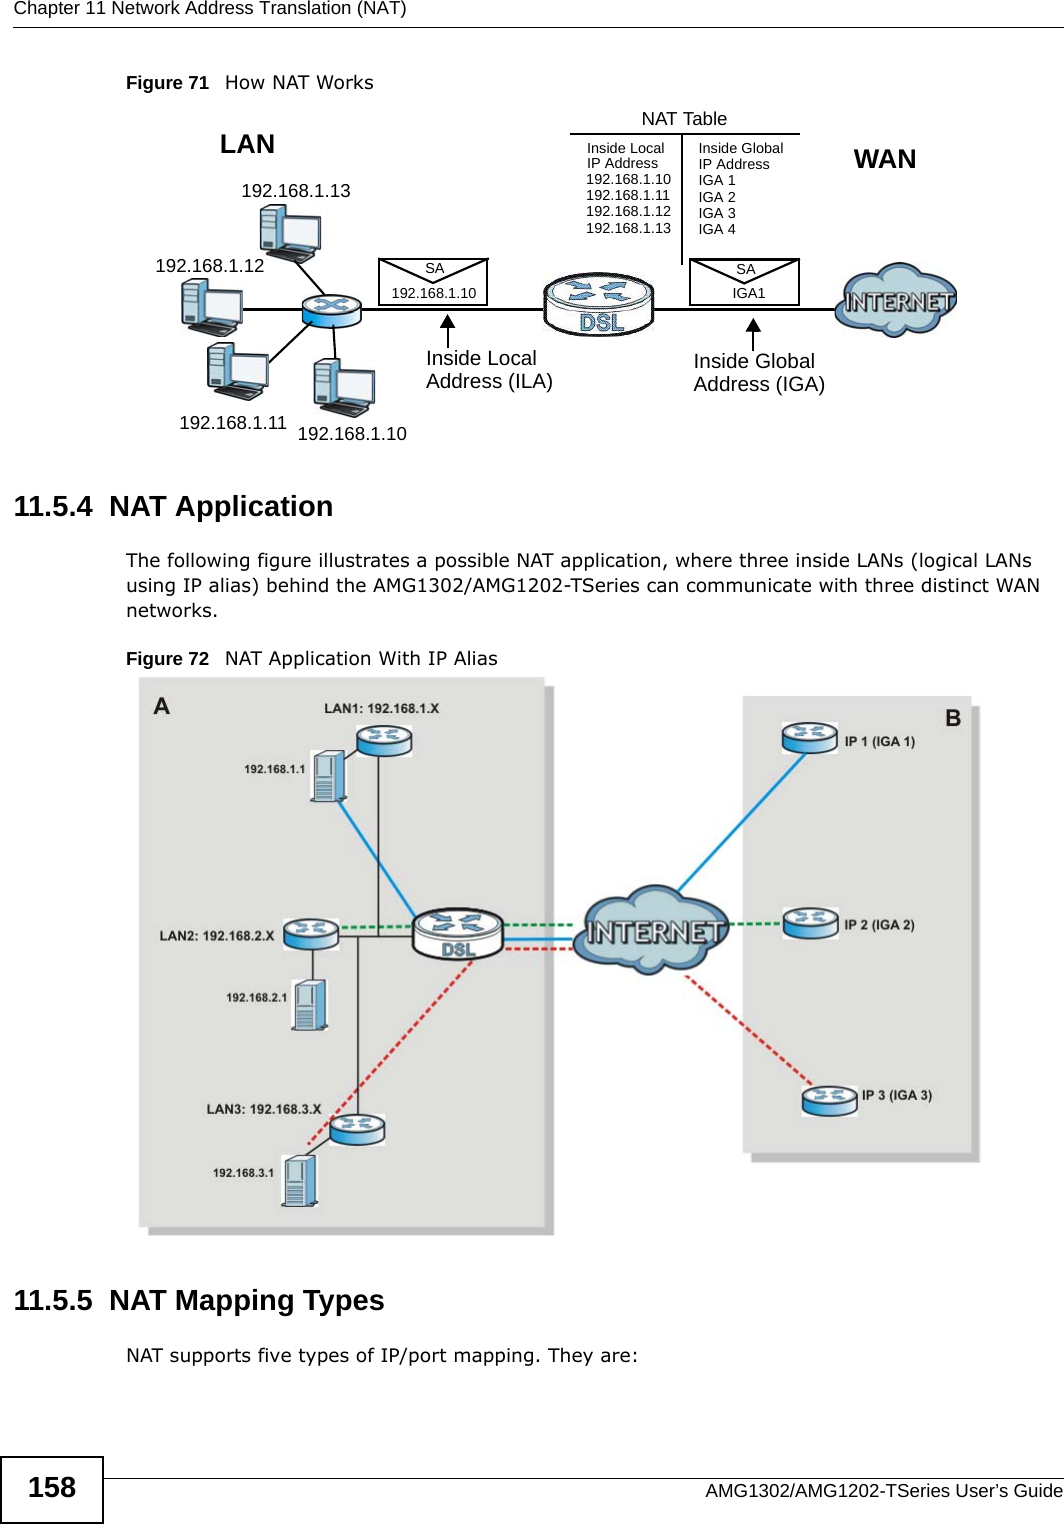 Chapter 11 Network Address Translation (NAT)AMG1302/AMG1202-TSeries User’s Guide158Figure 71   How NAT Works11.5.4  NAT ApplicationThe following figure illustrates a possible NAT application, where three inside LANs (logical LANs using IP alias) behind the AMG1302/AMG1202-TSeries can communicate with three distinct WAN networks.Figure 72   NAT Application With IP Alias11.5.5  NAT Mapping TypesNAT supports five types of IP/port mapping. They are:192.168.1.13192.168.1.10192.168.1.11192.168.1.12 SA192.168.1.10SAIGA1Inside LocalIP Address192.168.1.10192.168.1.11192.168.1.12192.168.1.13Inside Global IP AddressIGA 1IGA 2IGA 3IGA 4NAT TableWANLANInside LocalAddress (ILA) Inside GlobalAddress (IGA)